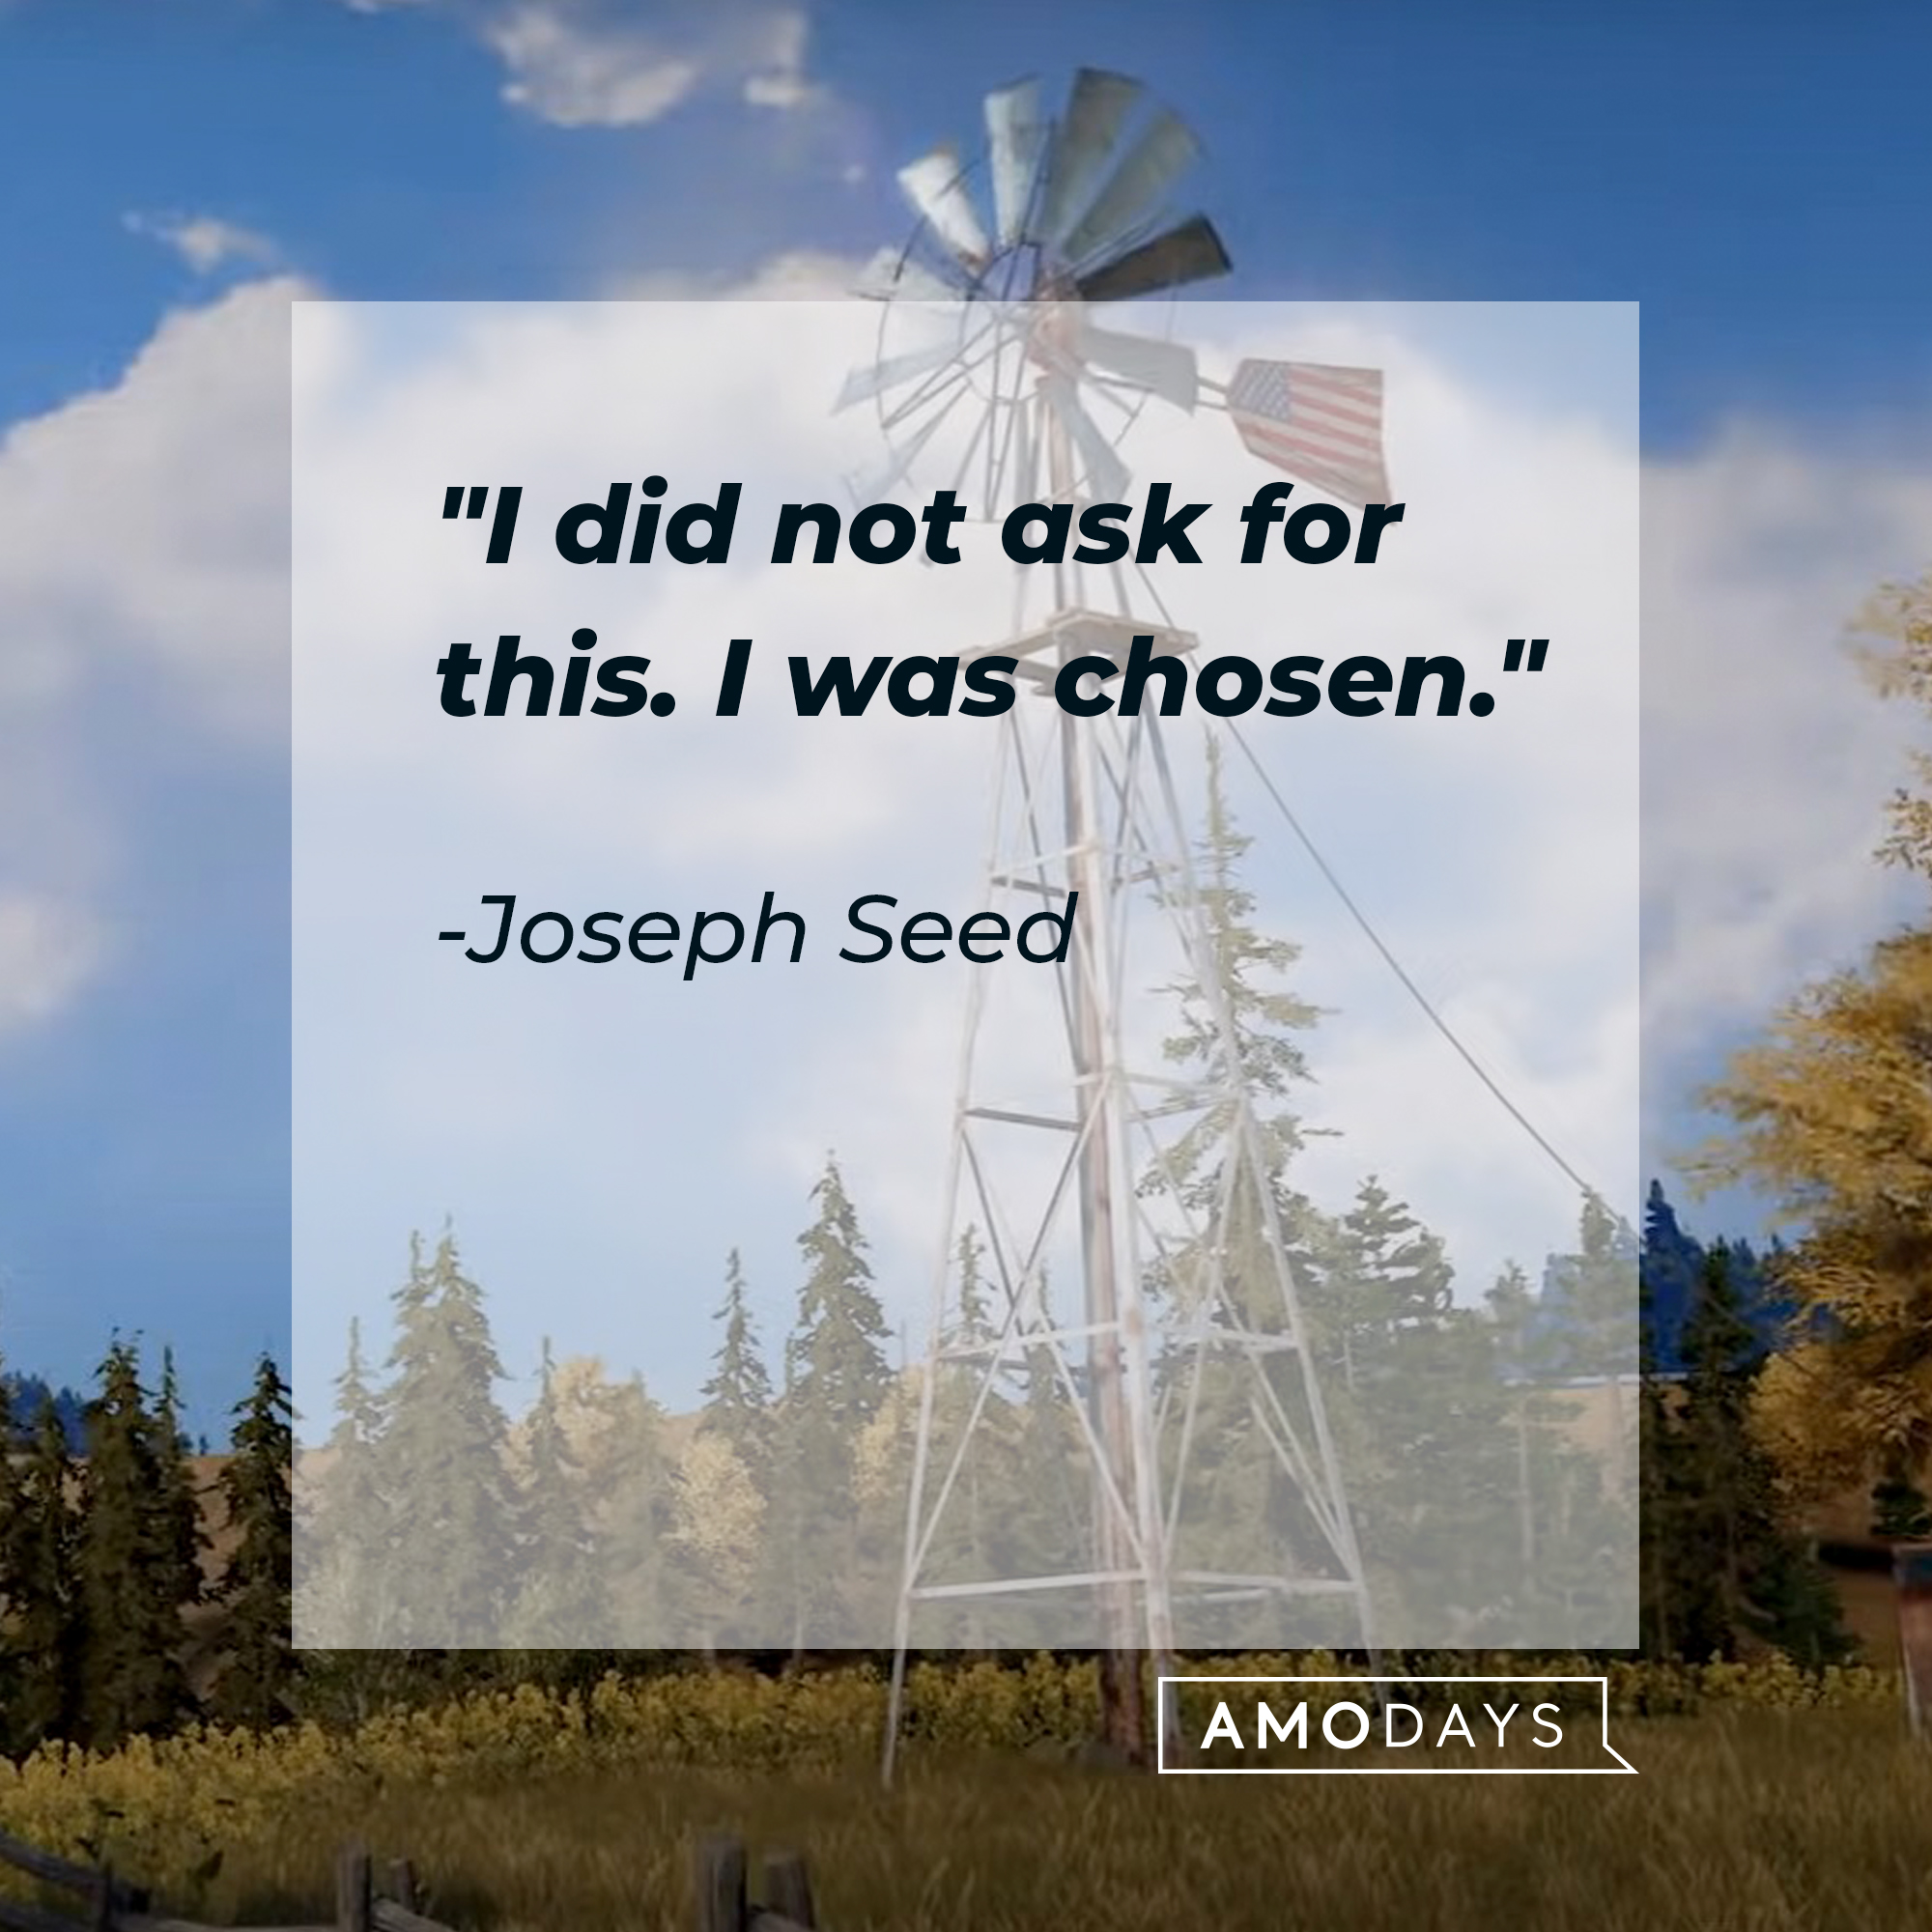 An image of "Far Cry 5" with Joseph Seed's quote: "I did not ask for this. I was chosen." | Source: youtube.com/Ubisoft North America